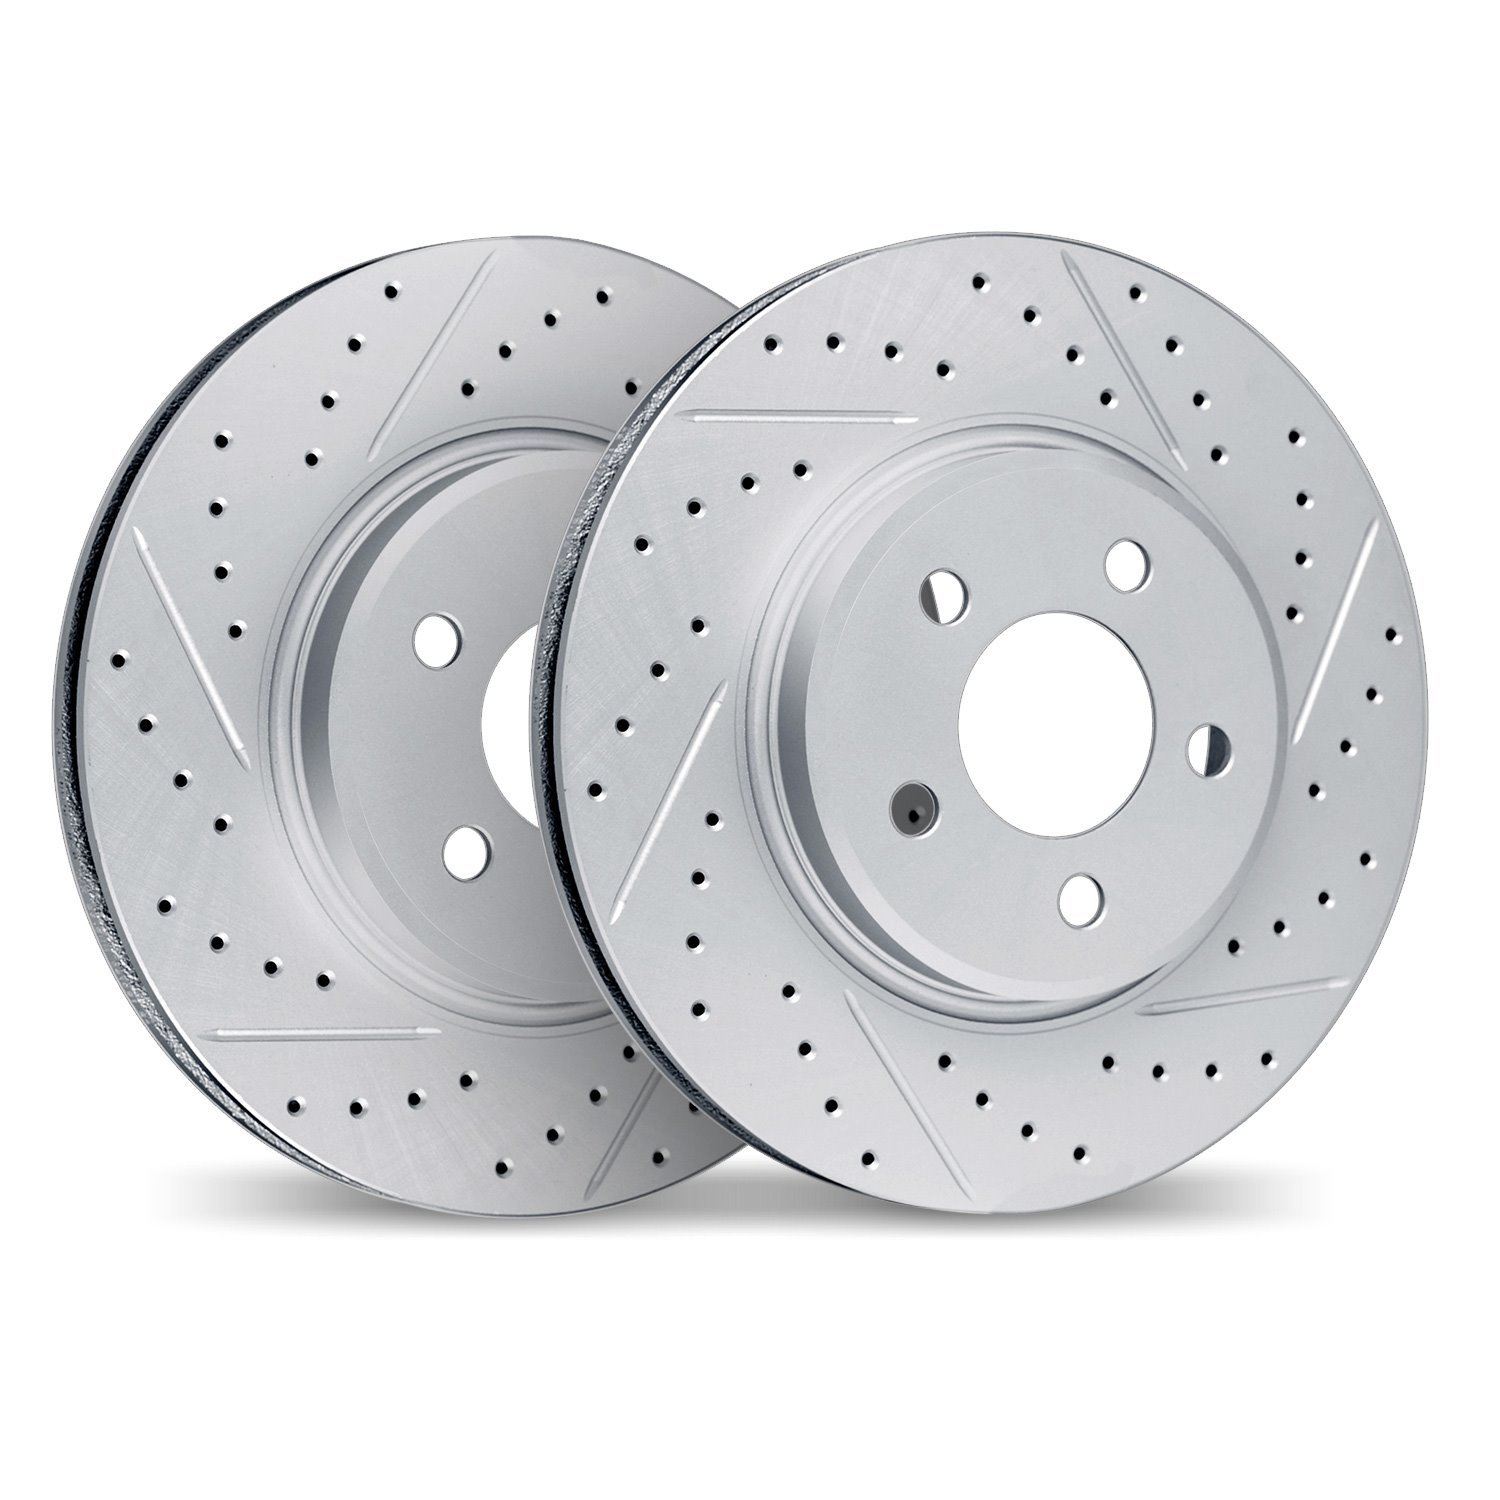 2002-47135 Geoperformance Drilled/Slotted Brake Rotors, Fits Select GM, Position: Front